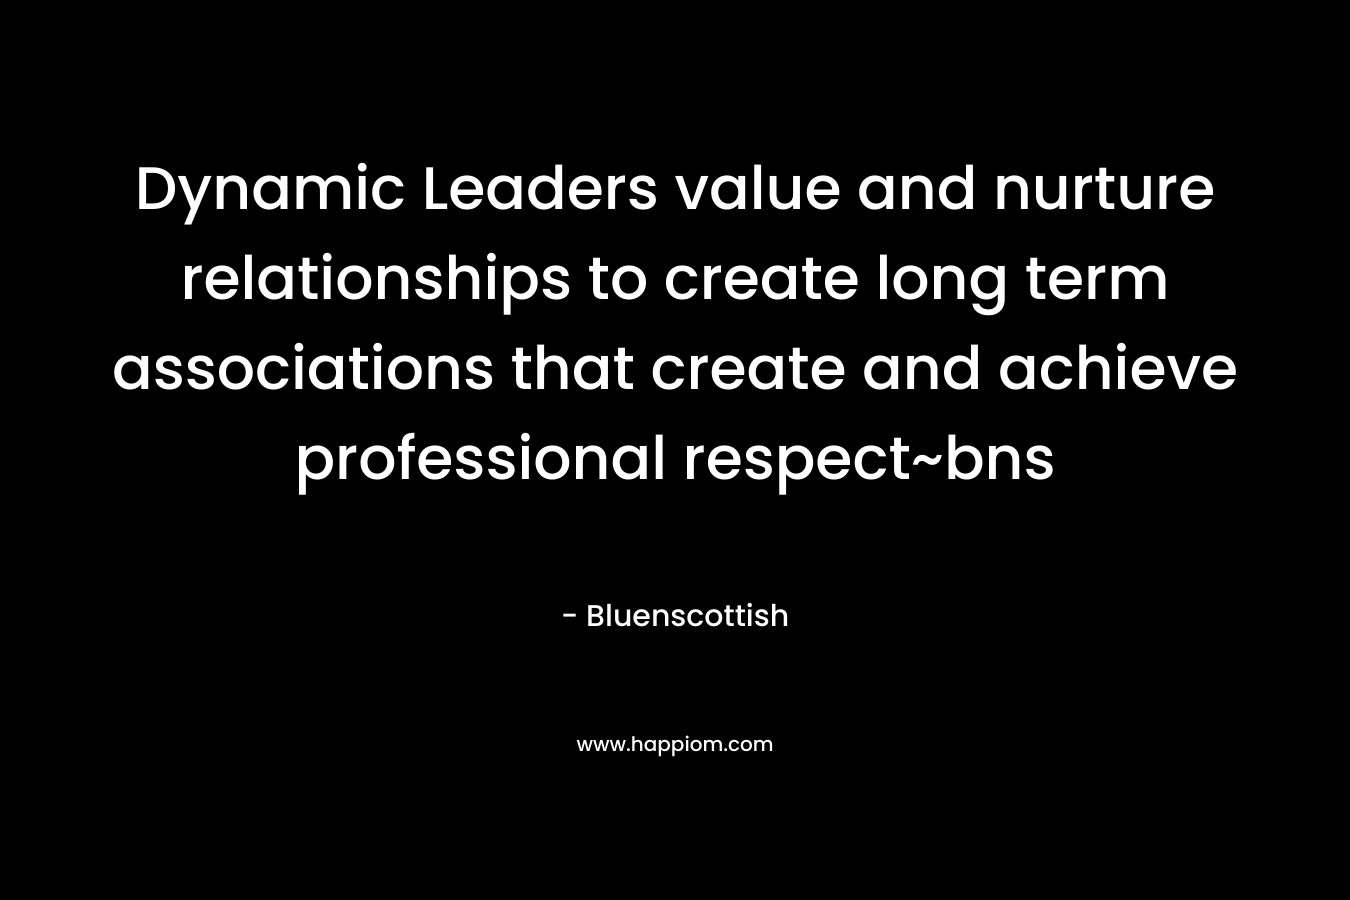 Dynamic Leaders value and nurture relationships to create long term associations that create and achieve professional respect~bns